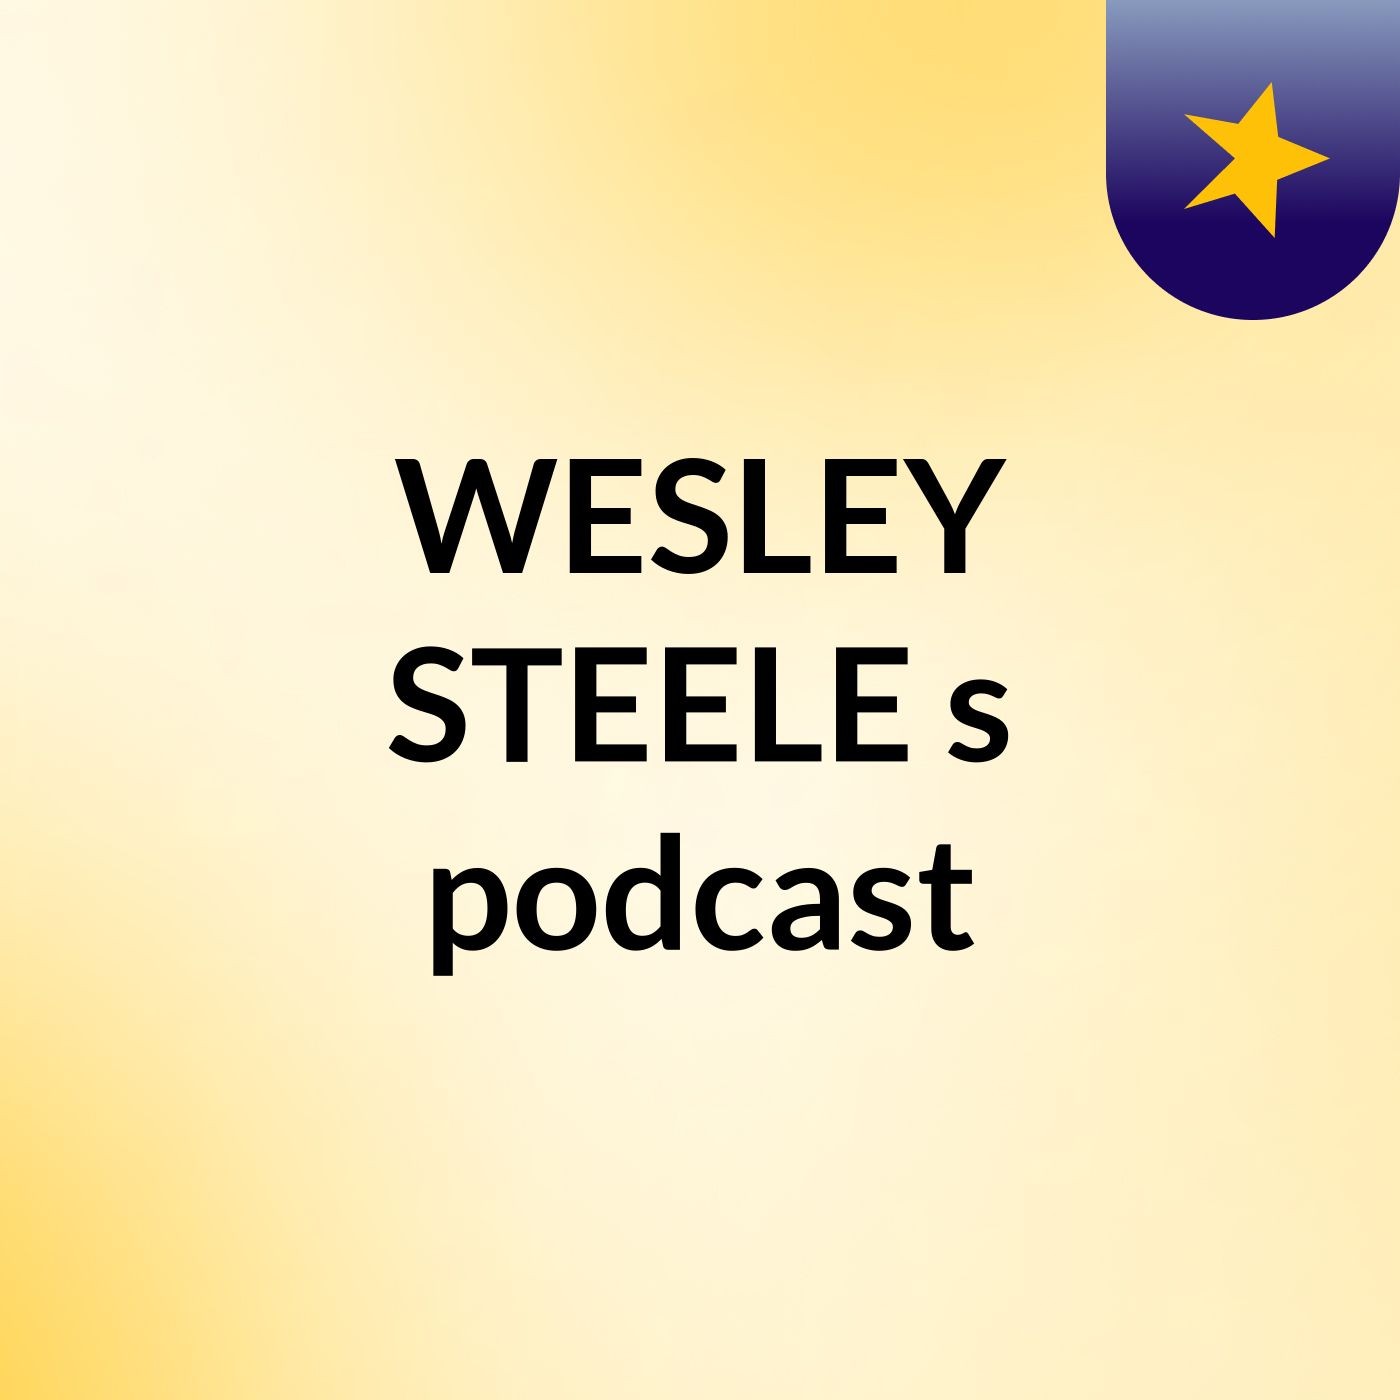 WESLEY STEELE's podcast